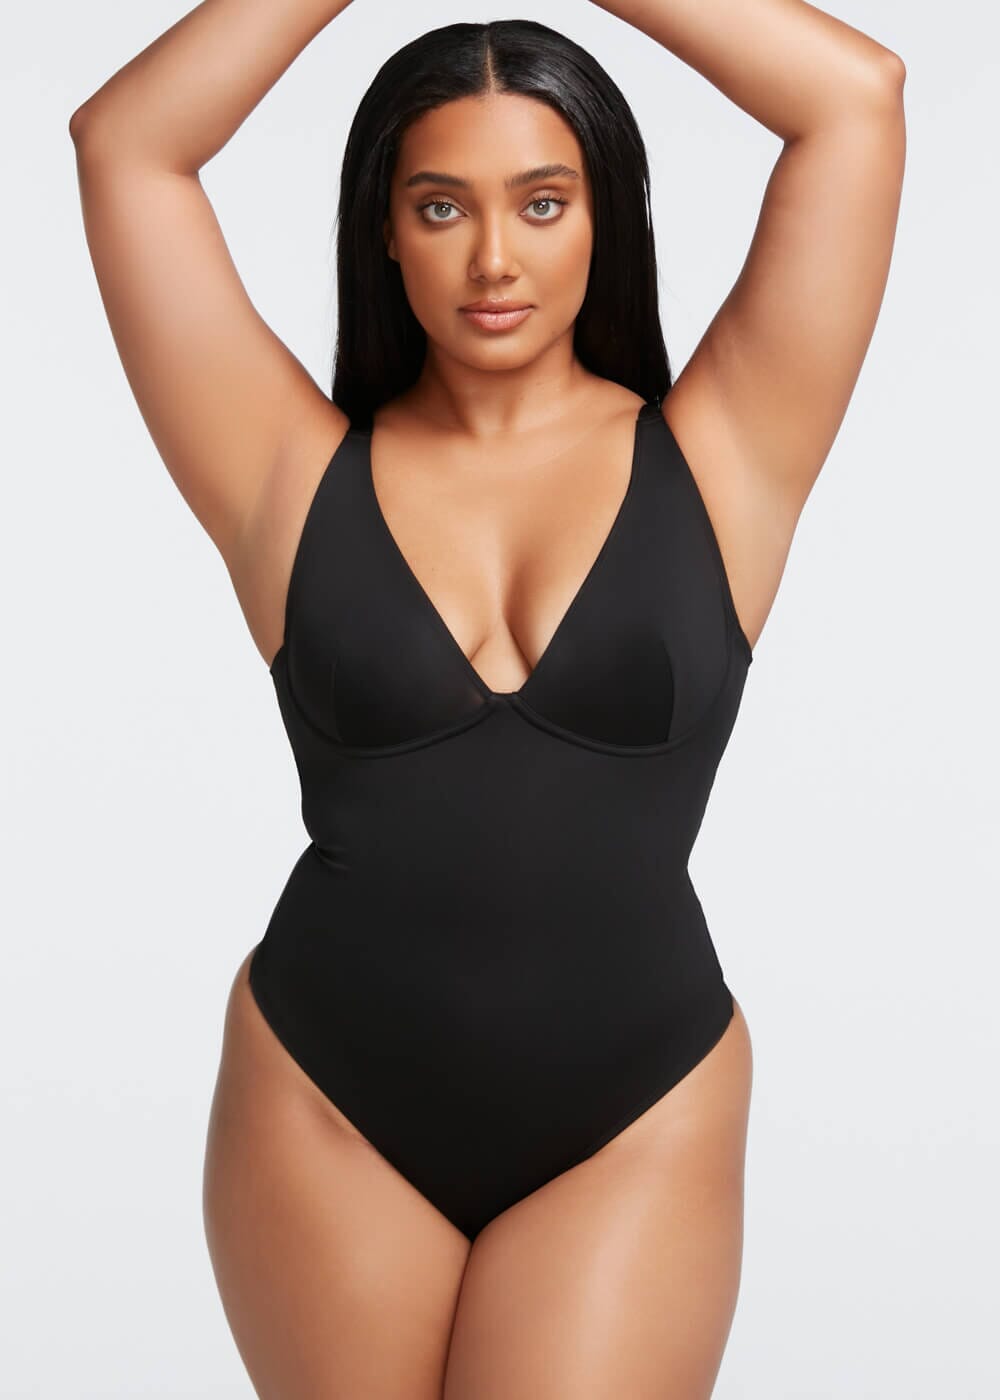 Shapewear 101: How to Choose the Best Shapewear for Plus Size